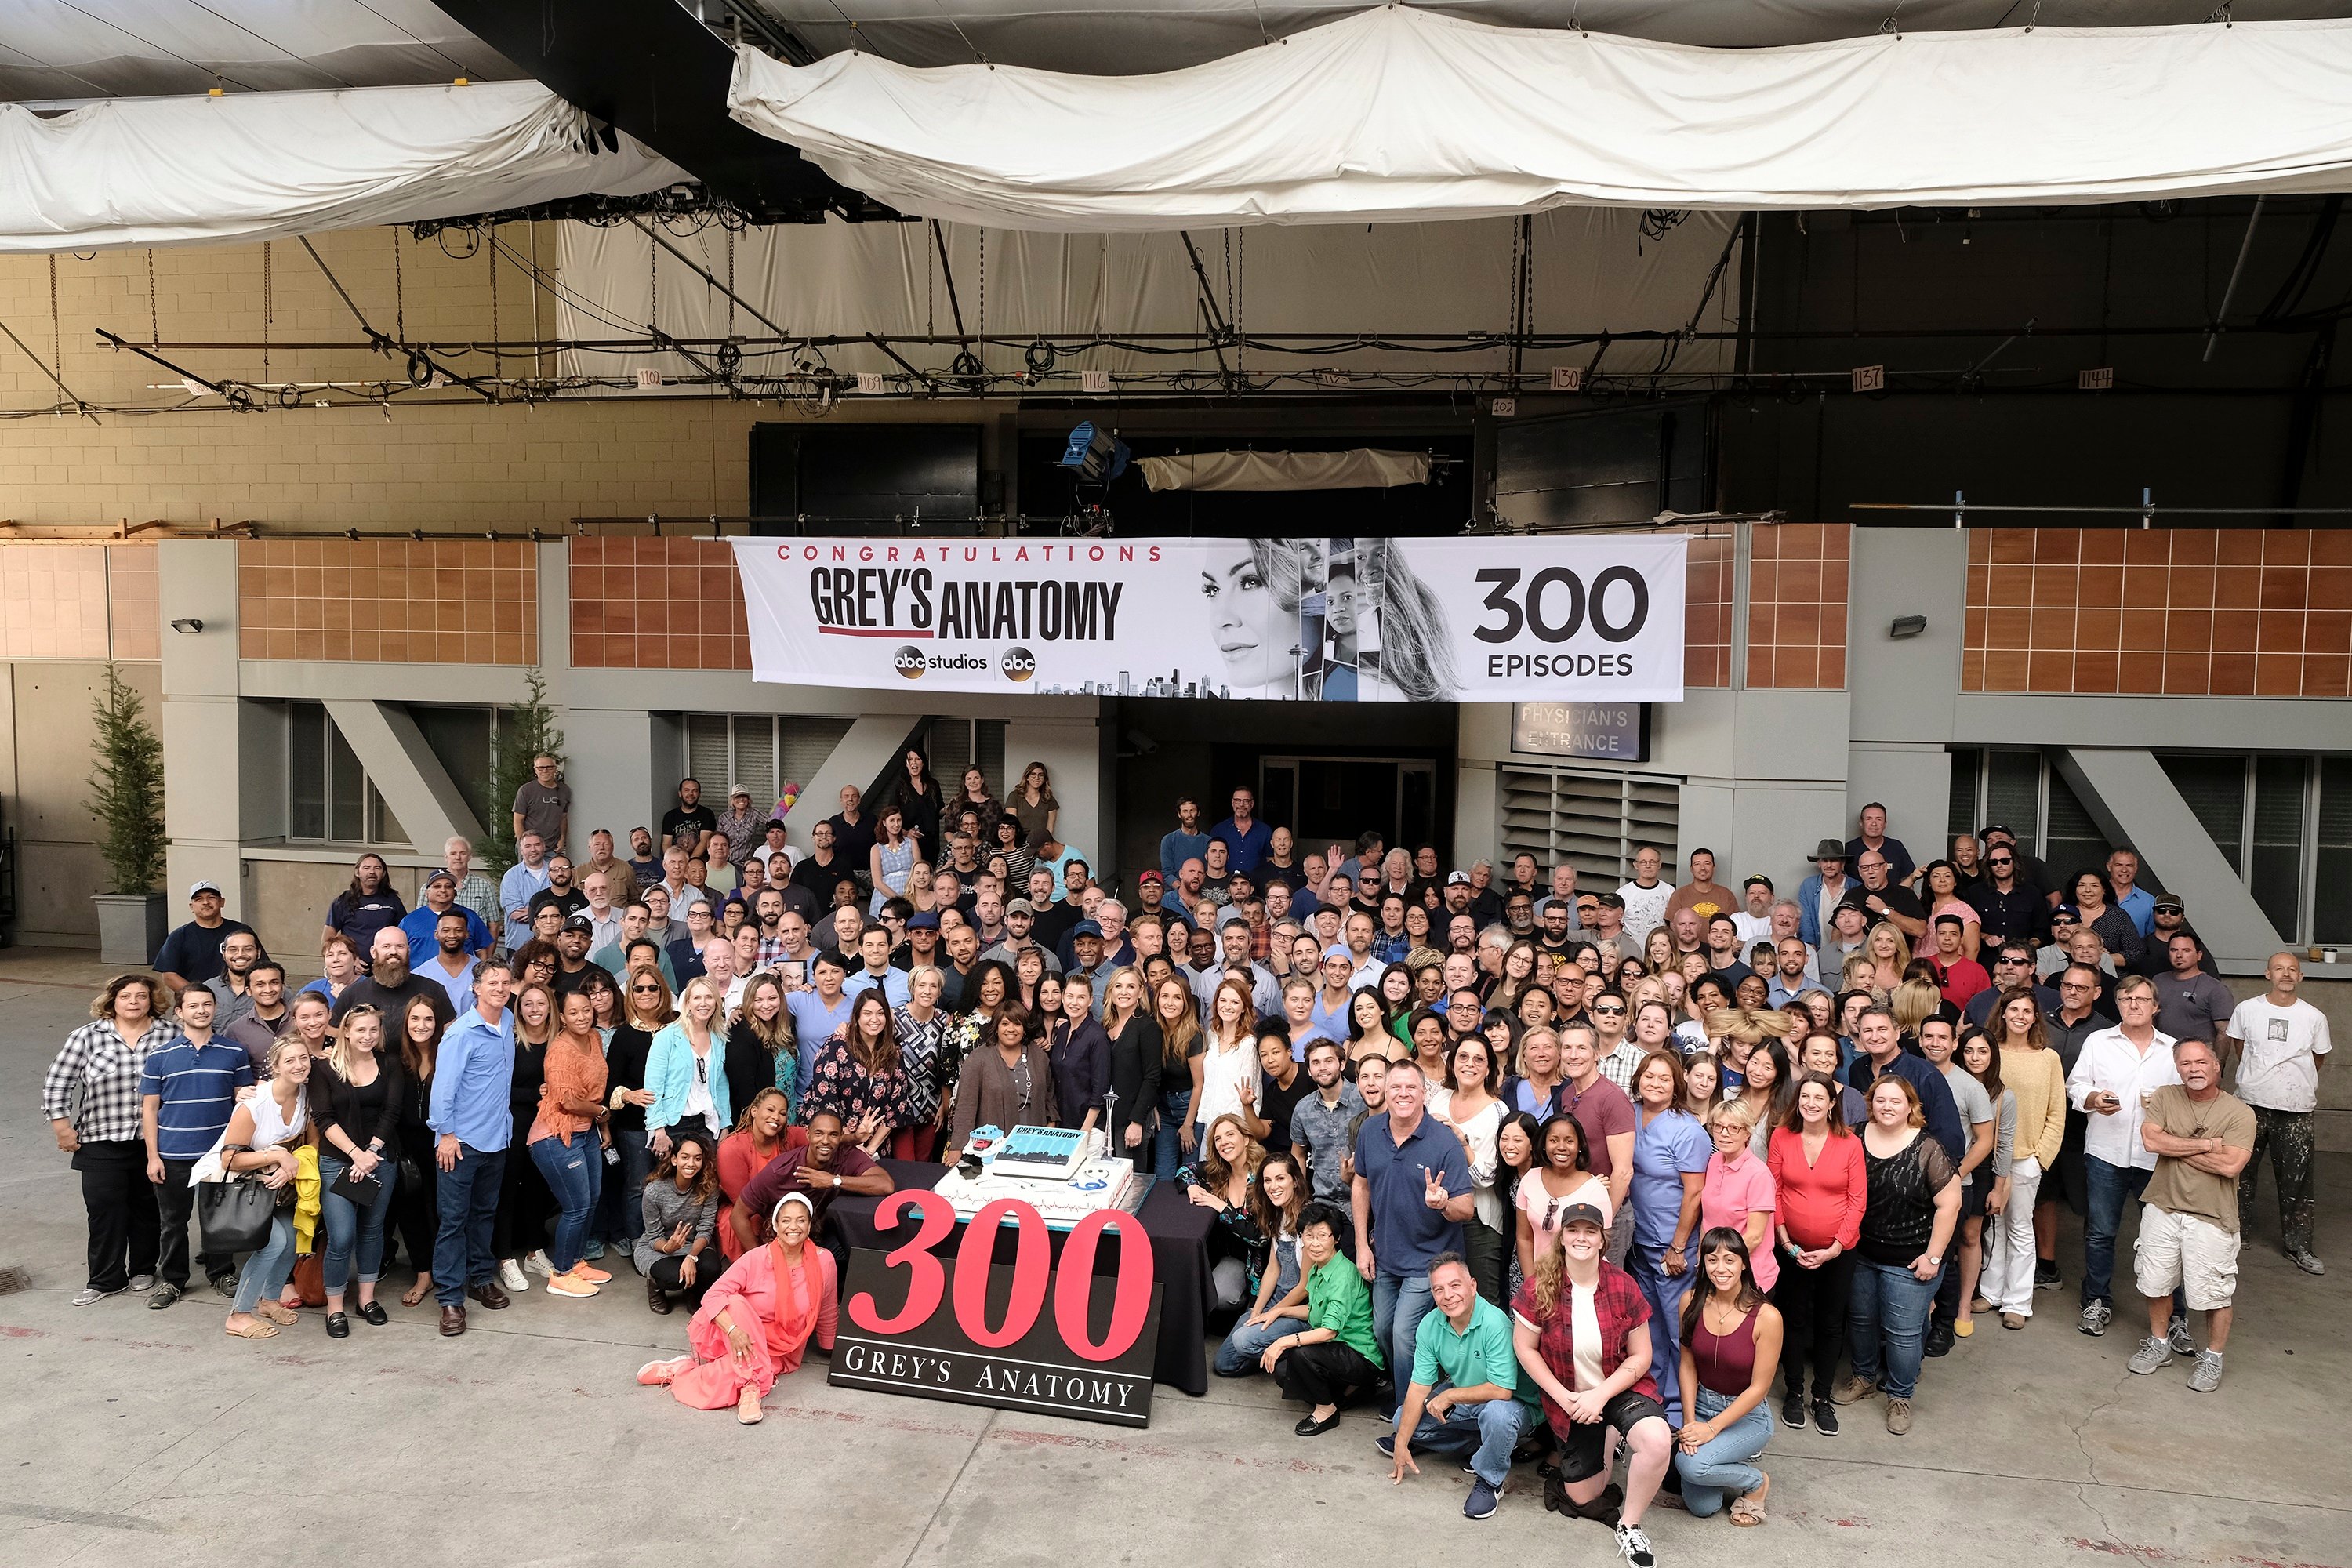 The cast and crew of 'Grey's Anatomy' for the 300th episode